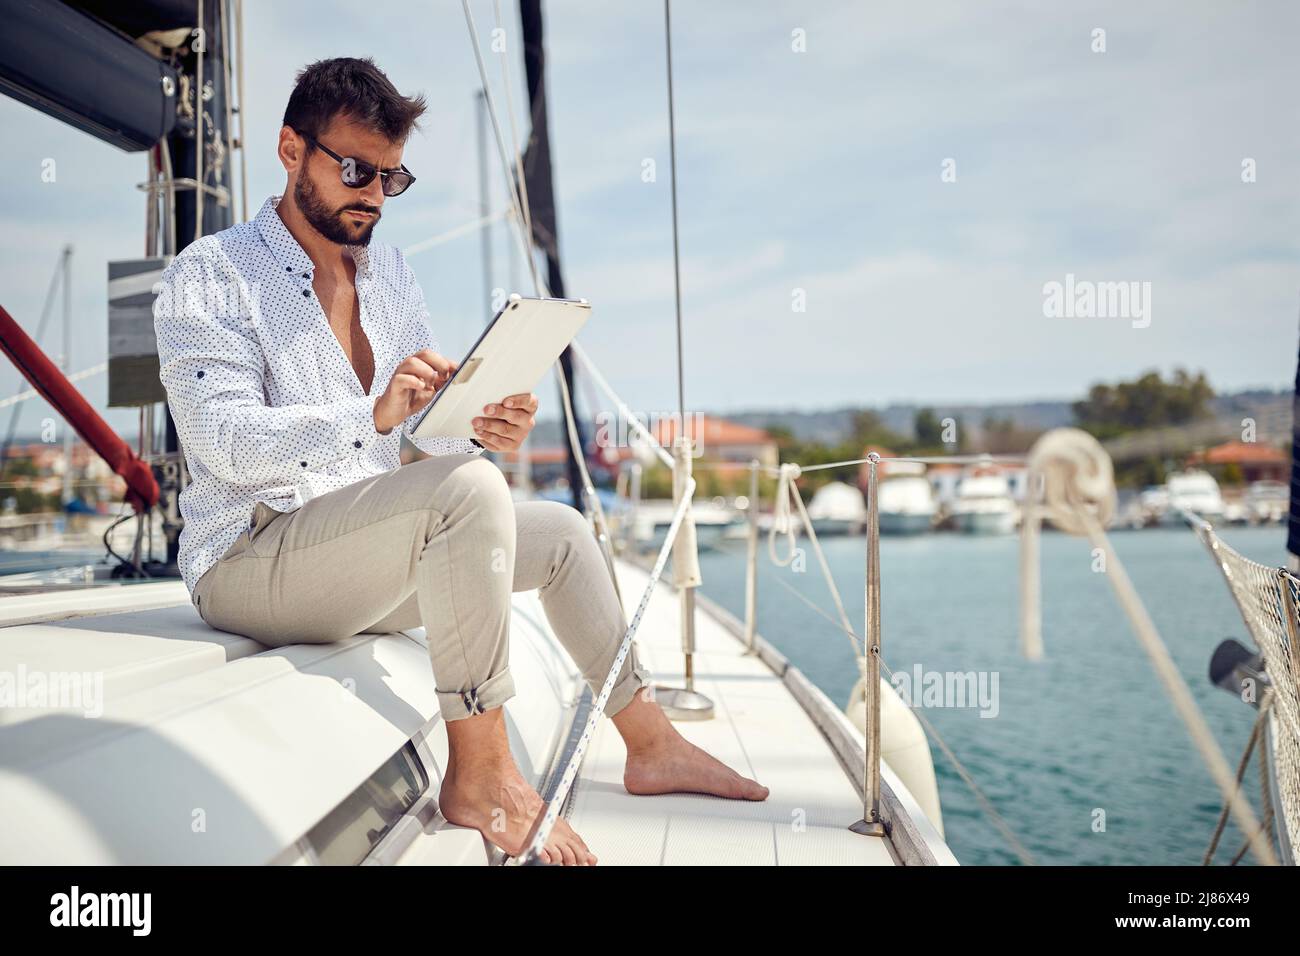 A young businessman is sitting on his yacht and doing some job on his tablet while riding in the dock on a beautiful day on the seaside. Summer, sea, Stock Photo